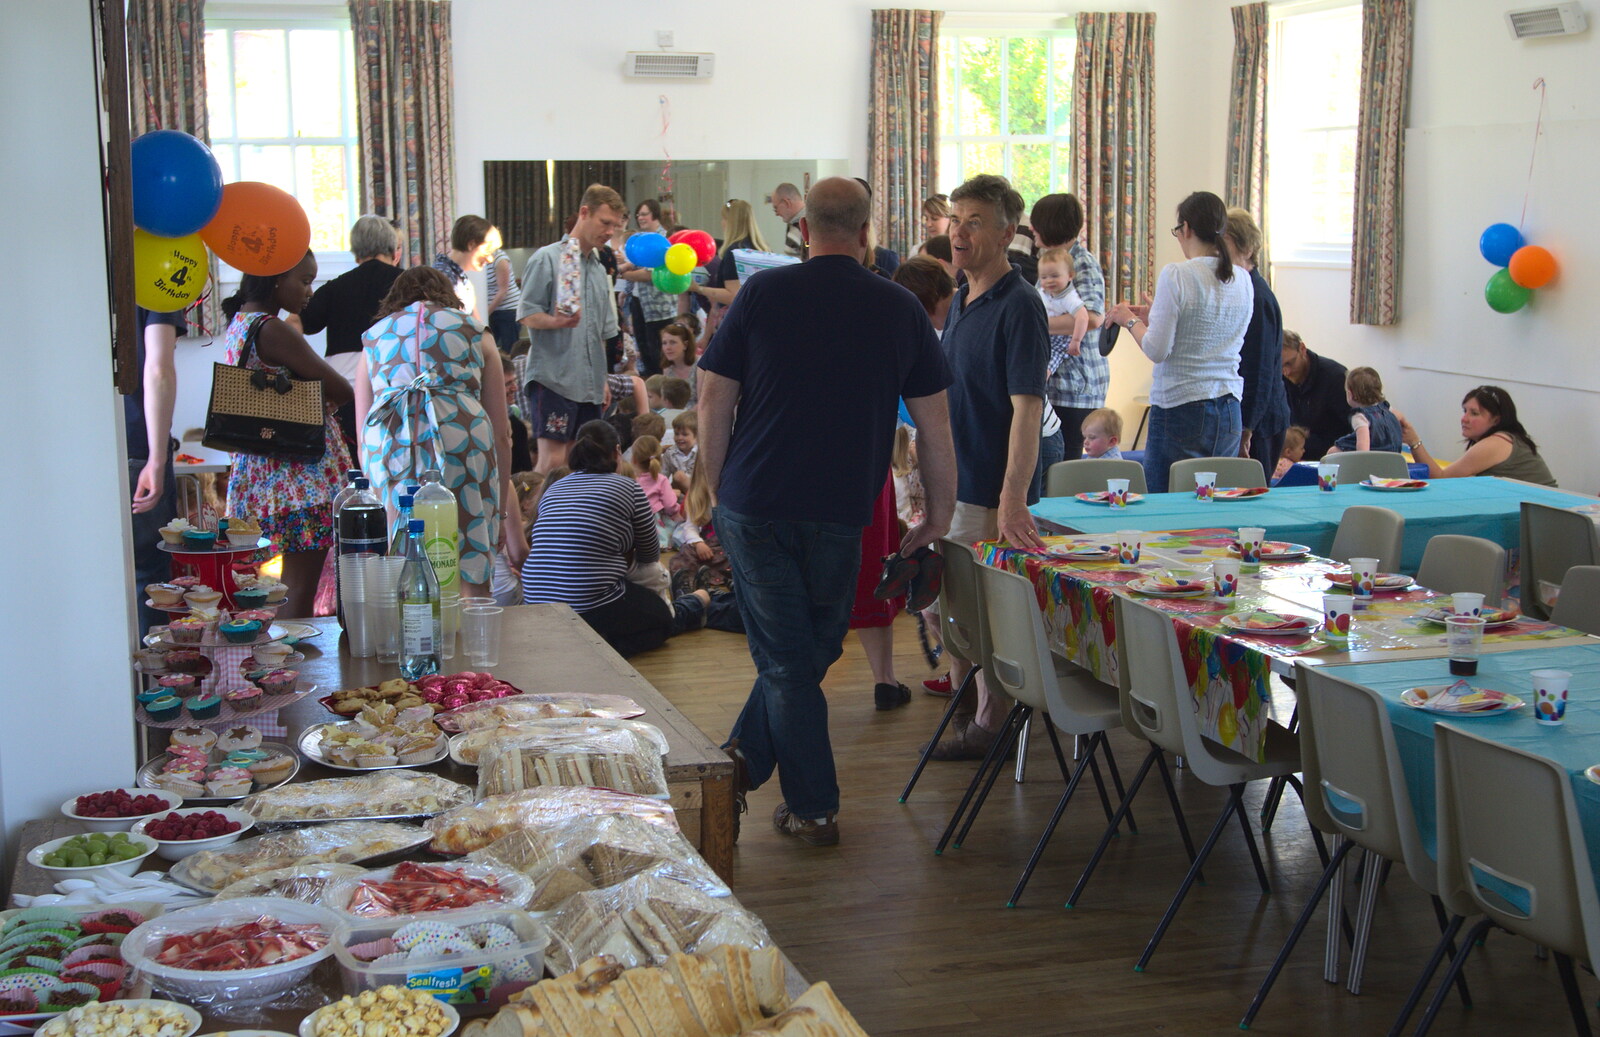 Tables are loaded and ready to go from Rosie and Henry's Birthday Party, Mellis, Suffolk - 5th May 2013